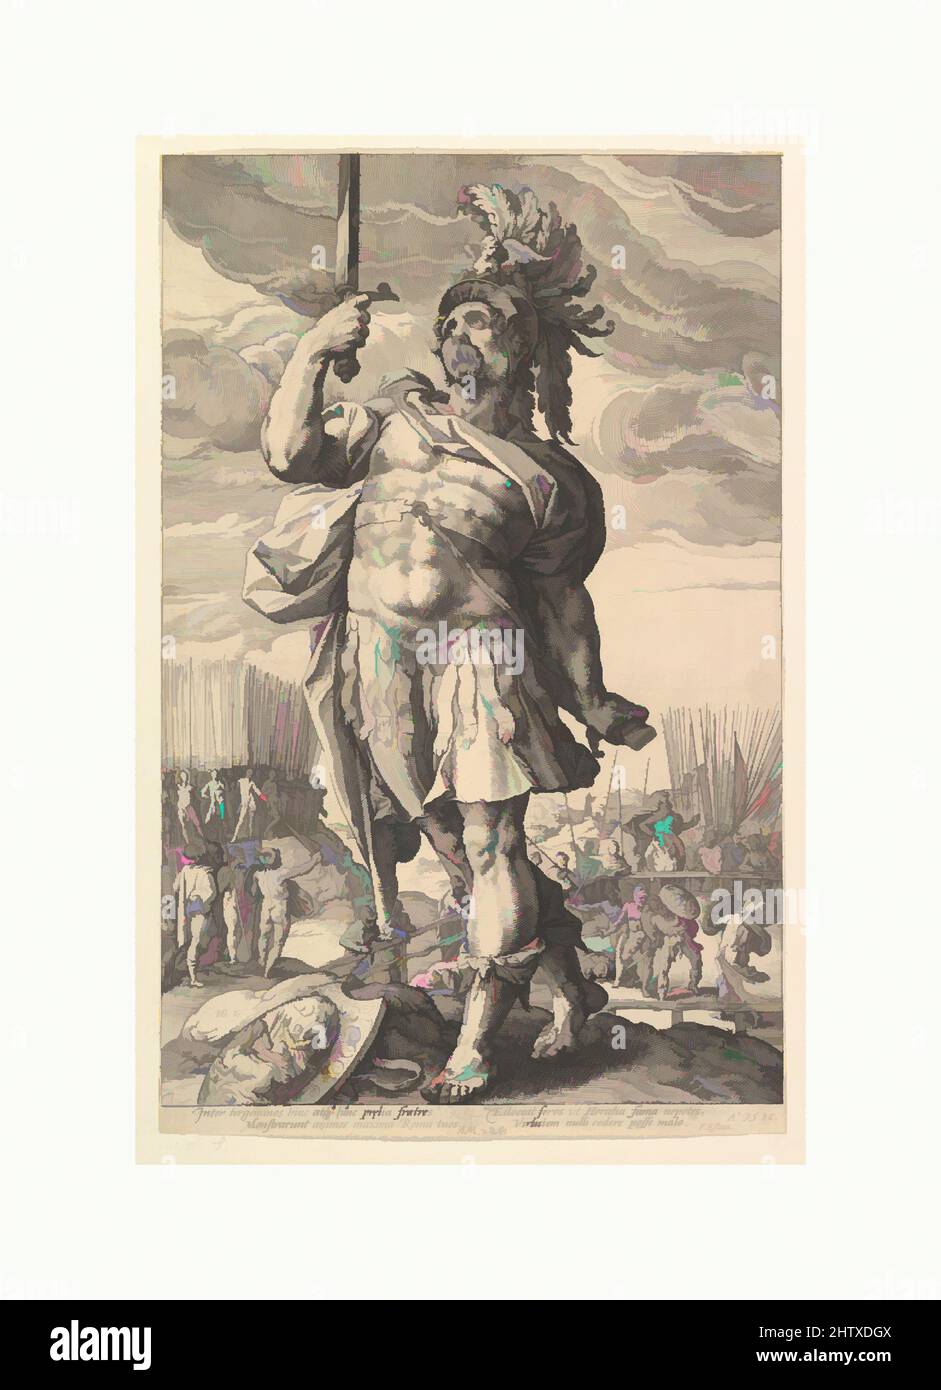 Art inspired by Publius Horatius, 1586, Engraving, 14 5/16 x 9 3/16 in. (36.4 x 23.3 cm), Prints, Hendrick Goltzius (Netherlandish, Mühlbracht 1558–1617 Haarlem, Classic works modernized by Artotop with a splash of modernity. Shapes, color and value, eye-catching visual impact on art. Emotions through freedom of artworks in a contemporary way. A timeless message pursuing a wildly creative new direction. Artists turning to the digital medium and creating the Artotop NFT Stock Photo